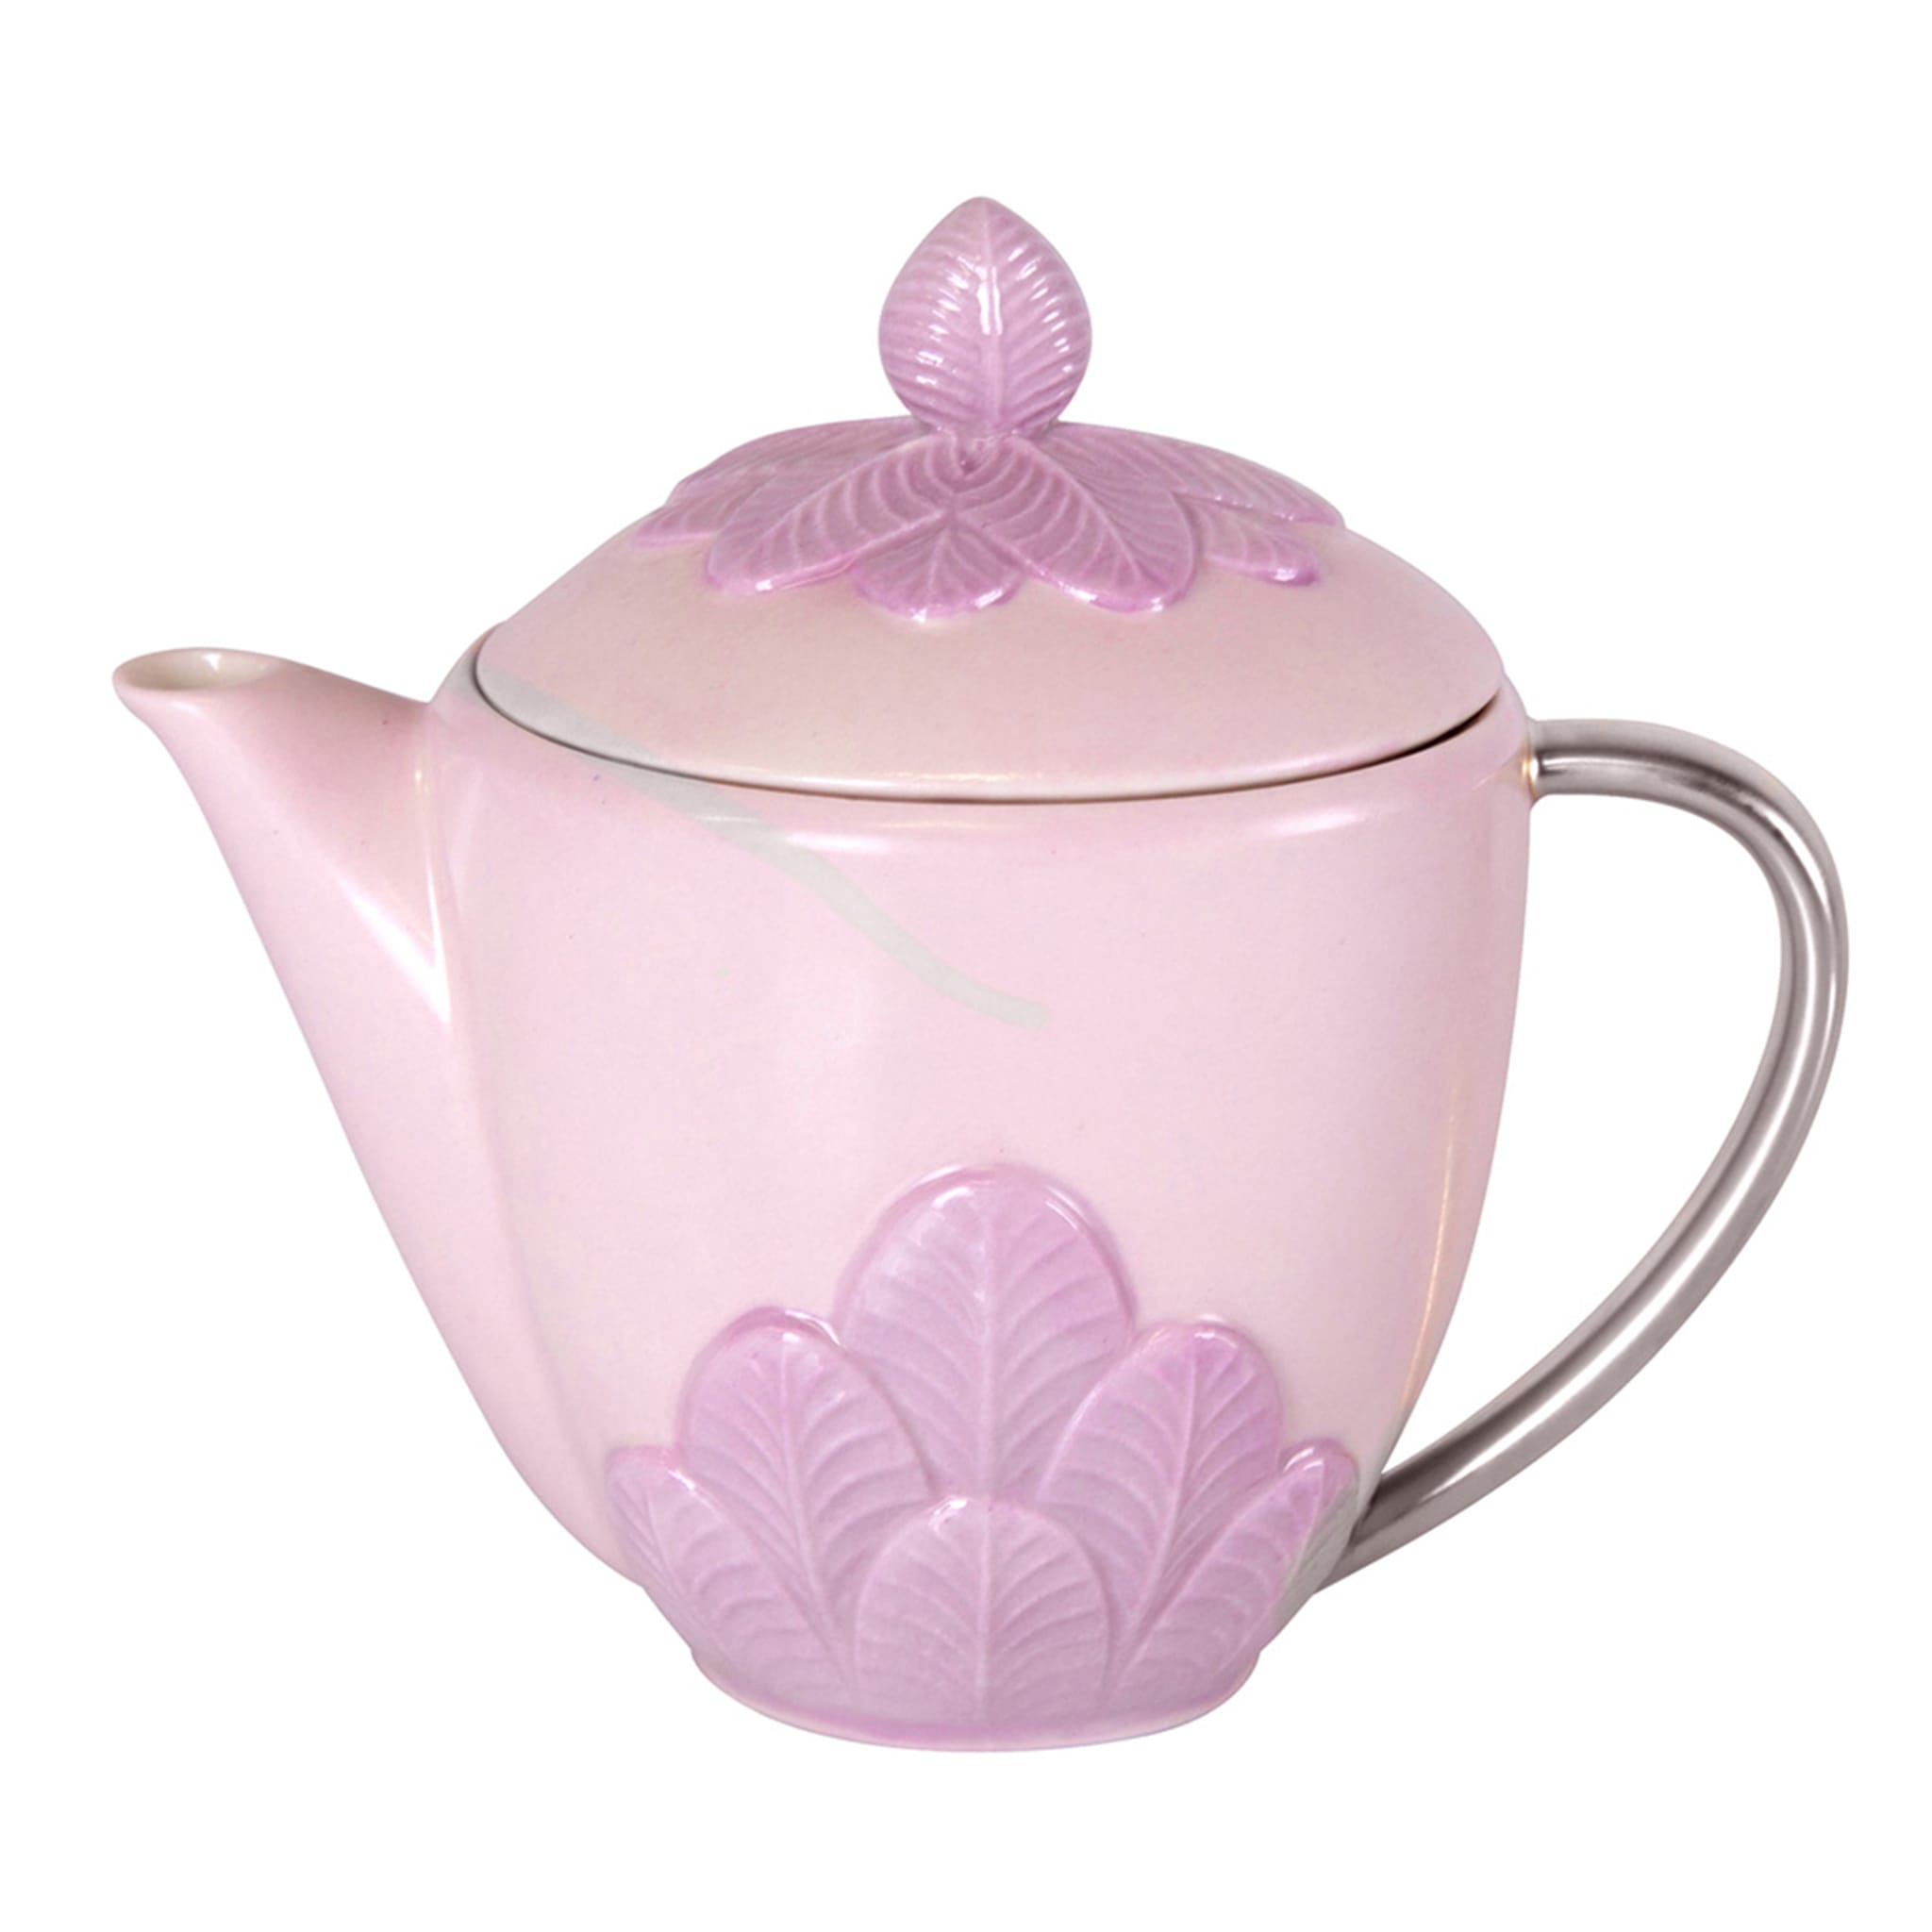 PEACOCK CREAMER - PINK AND SILVER - Main view